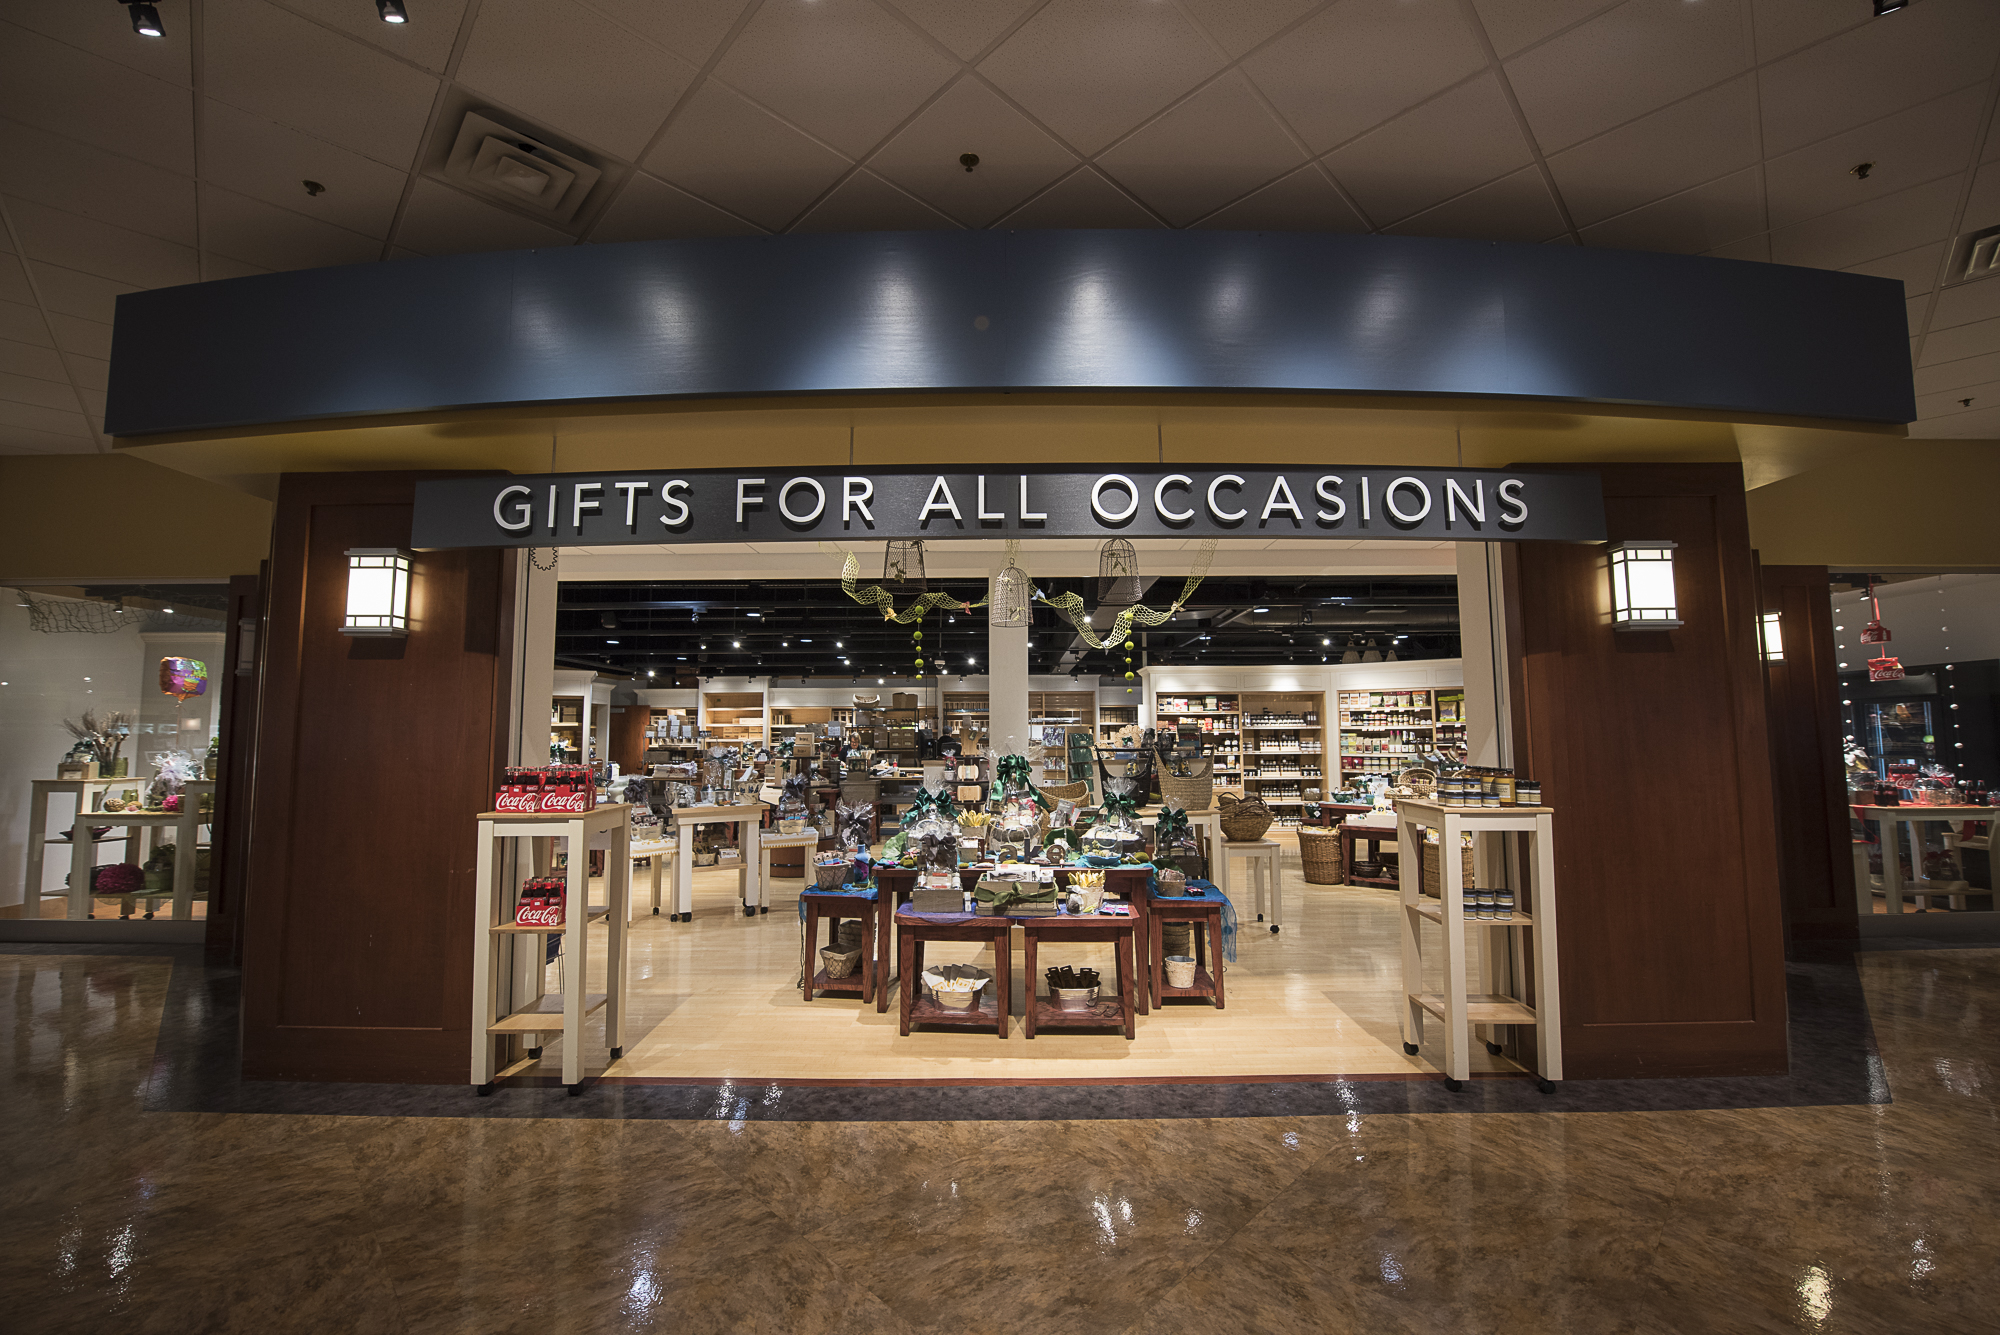 A gifts sections with gifts for all occasions written above the doorway.